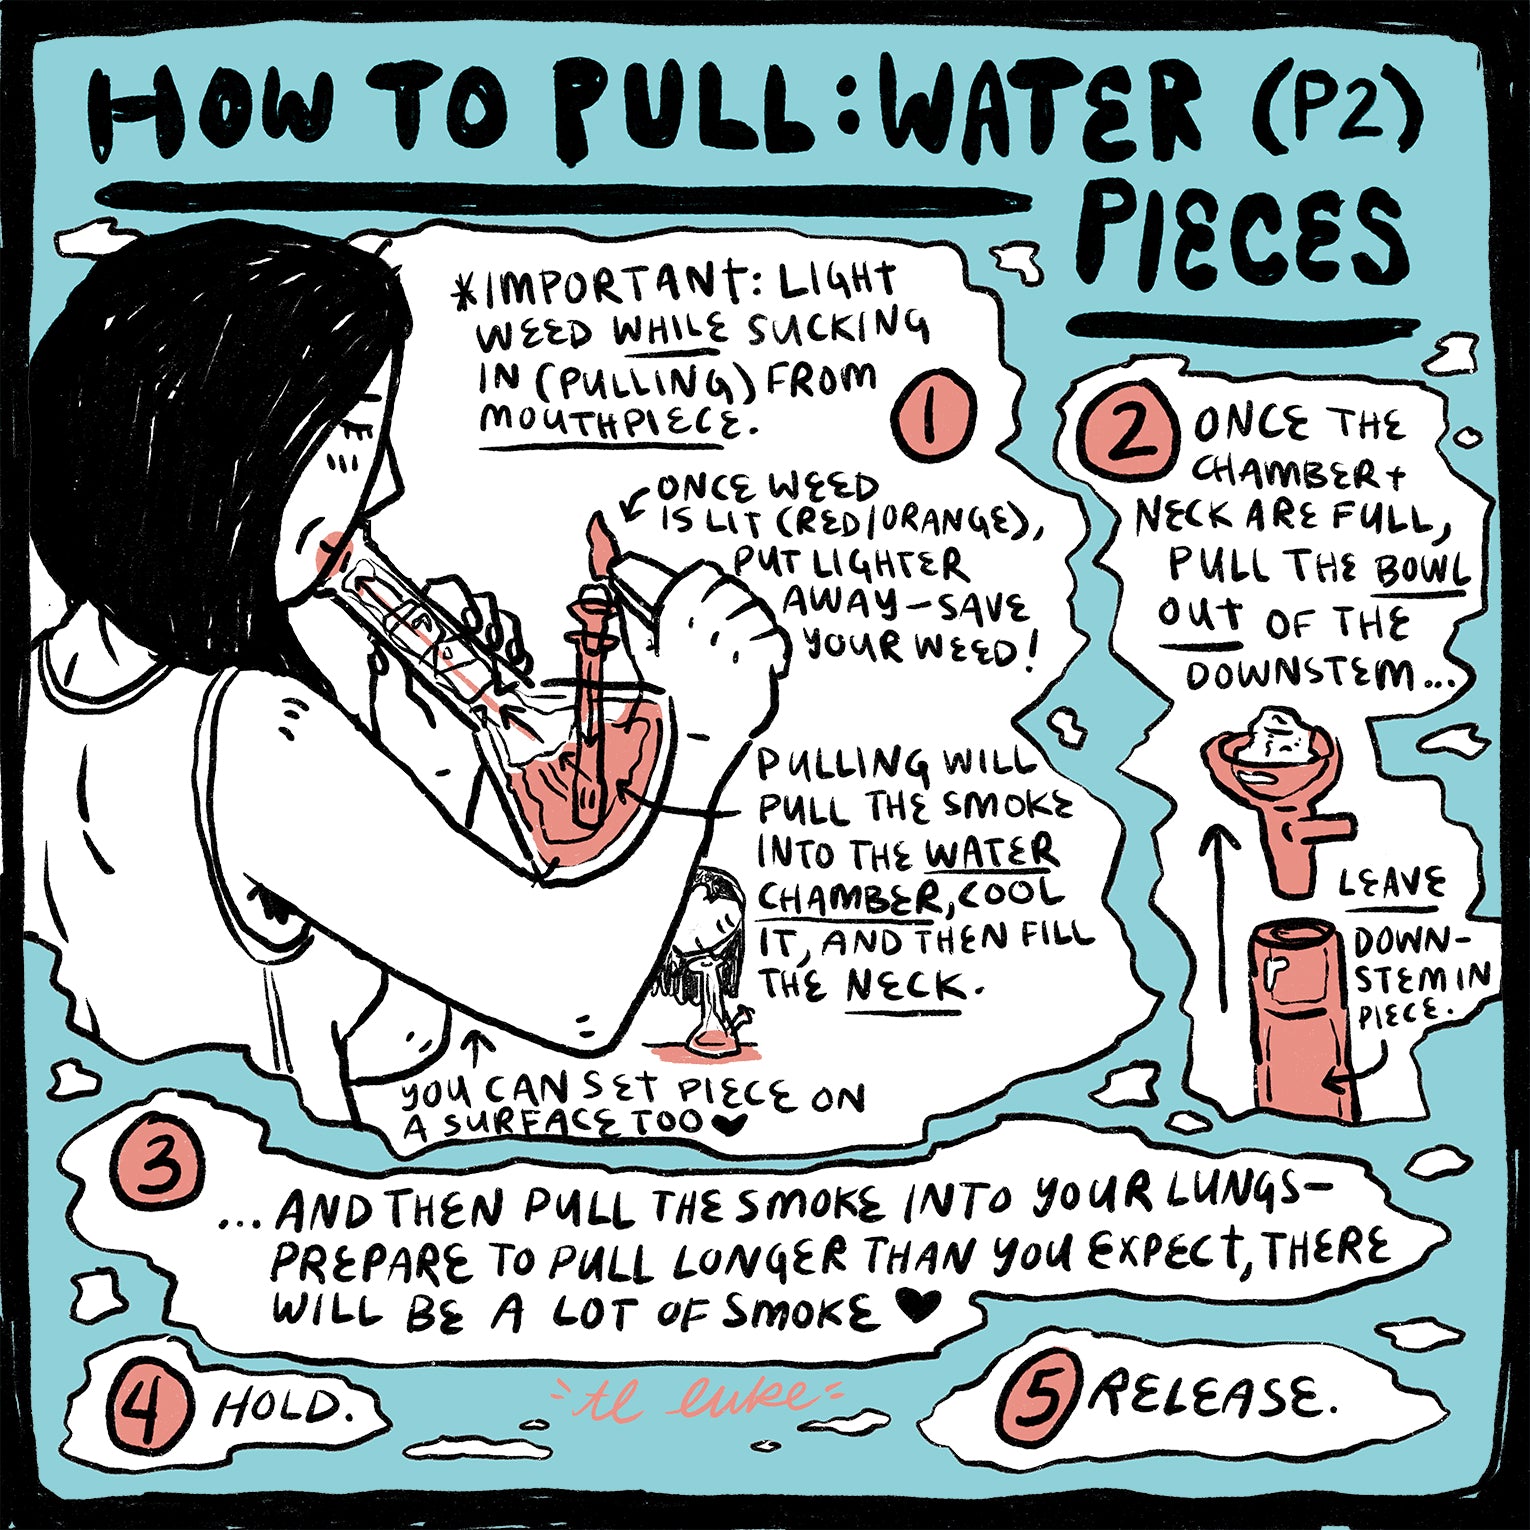 Auntie Luke's Stoner Guide, How to Pull: Water Pieces P2